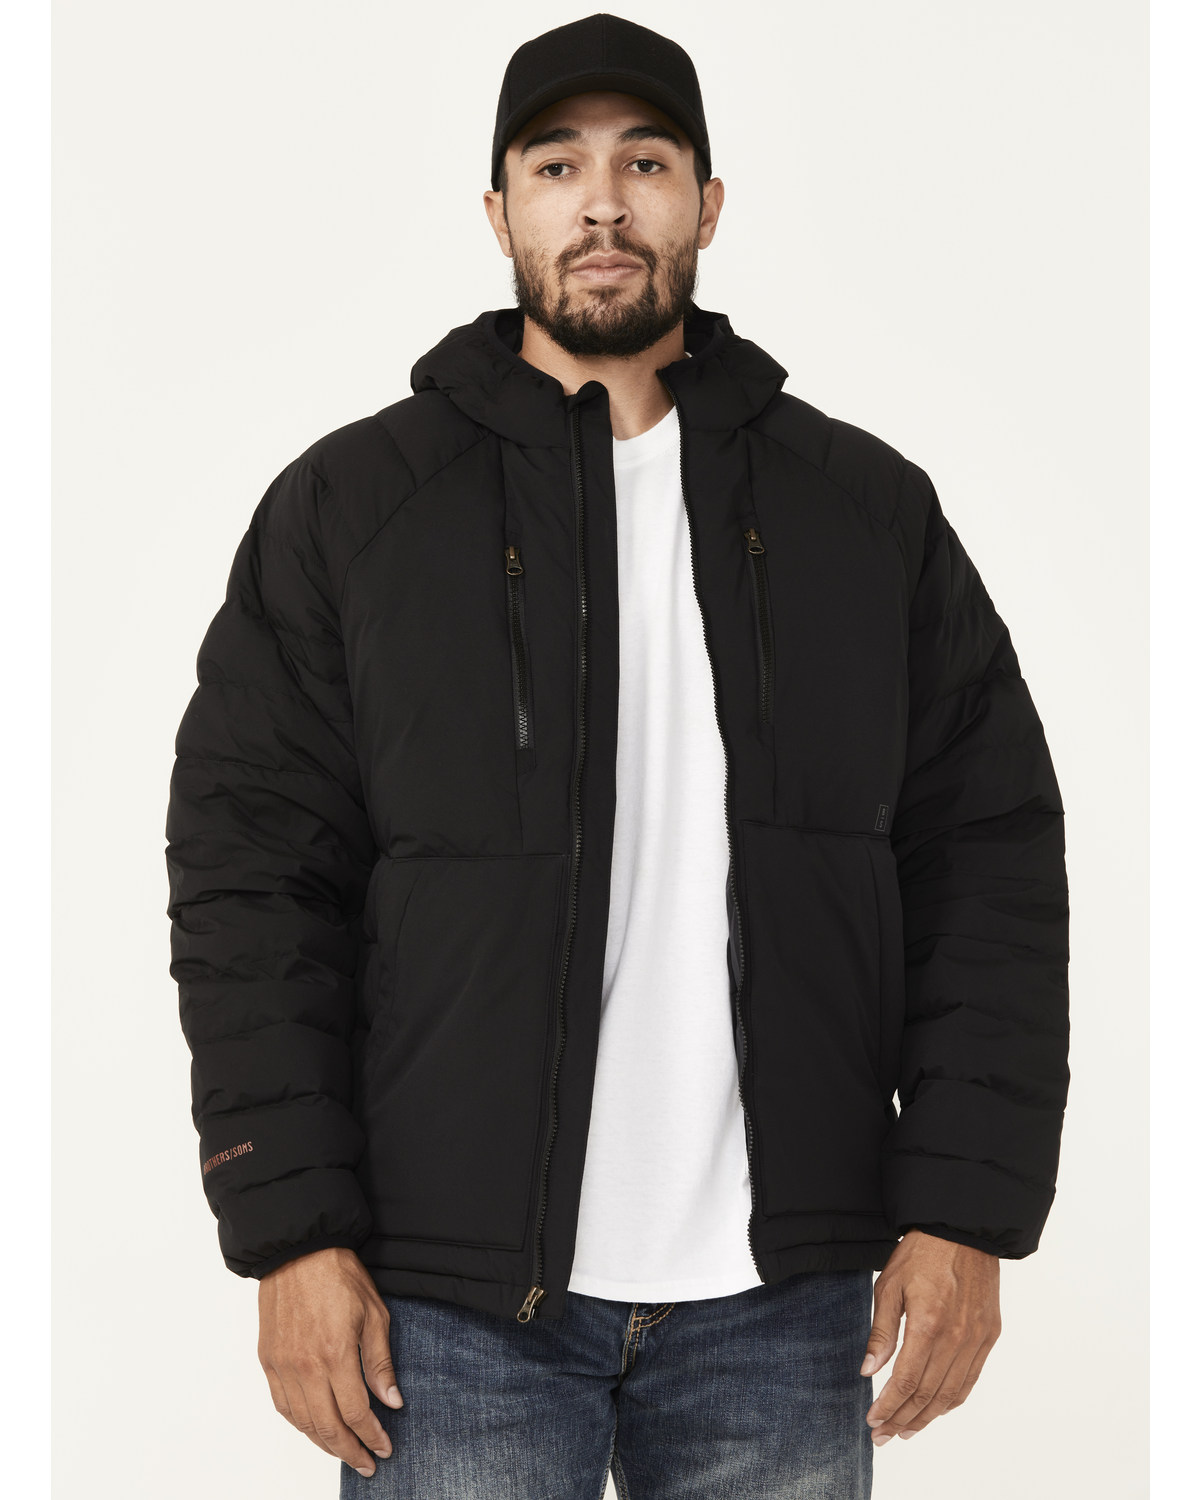 Brothers and Sons Men's Down Hooded Jacket